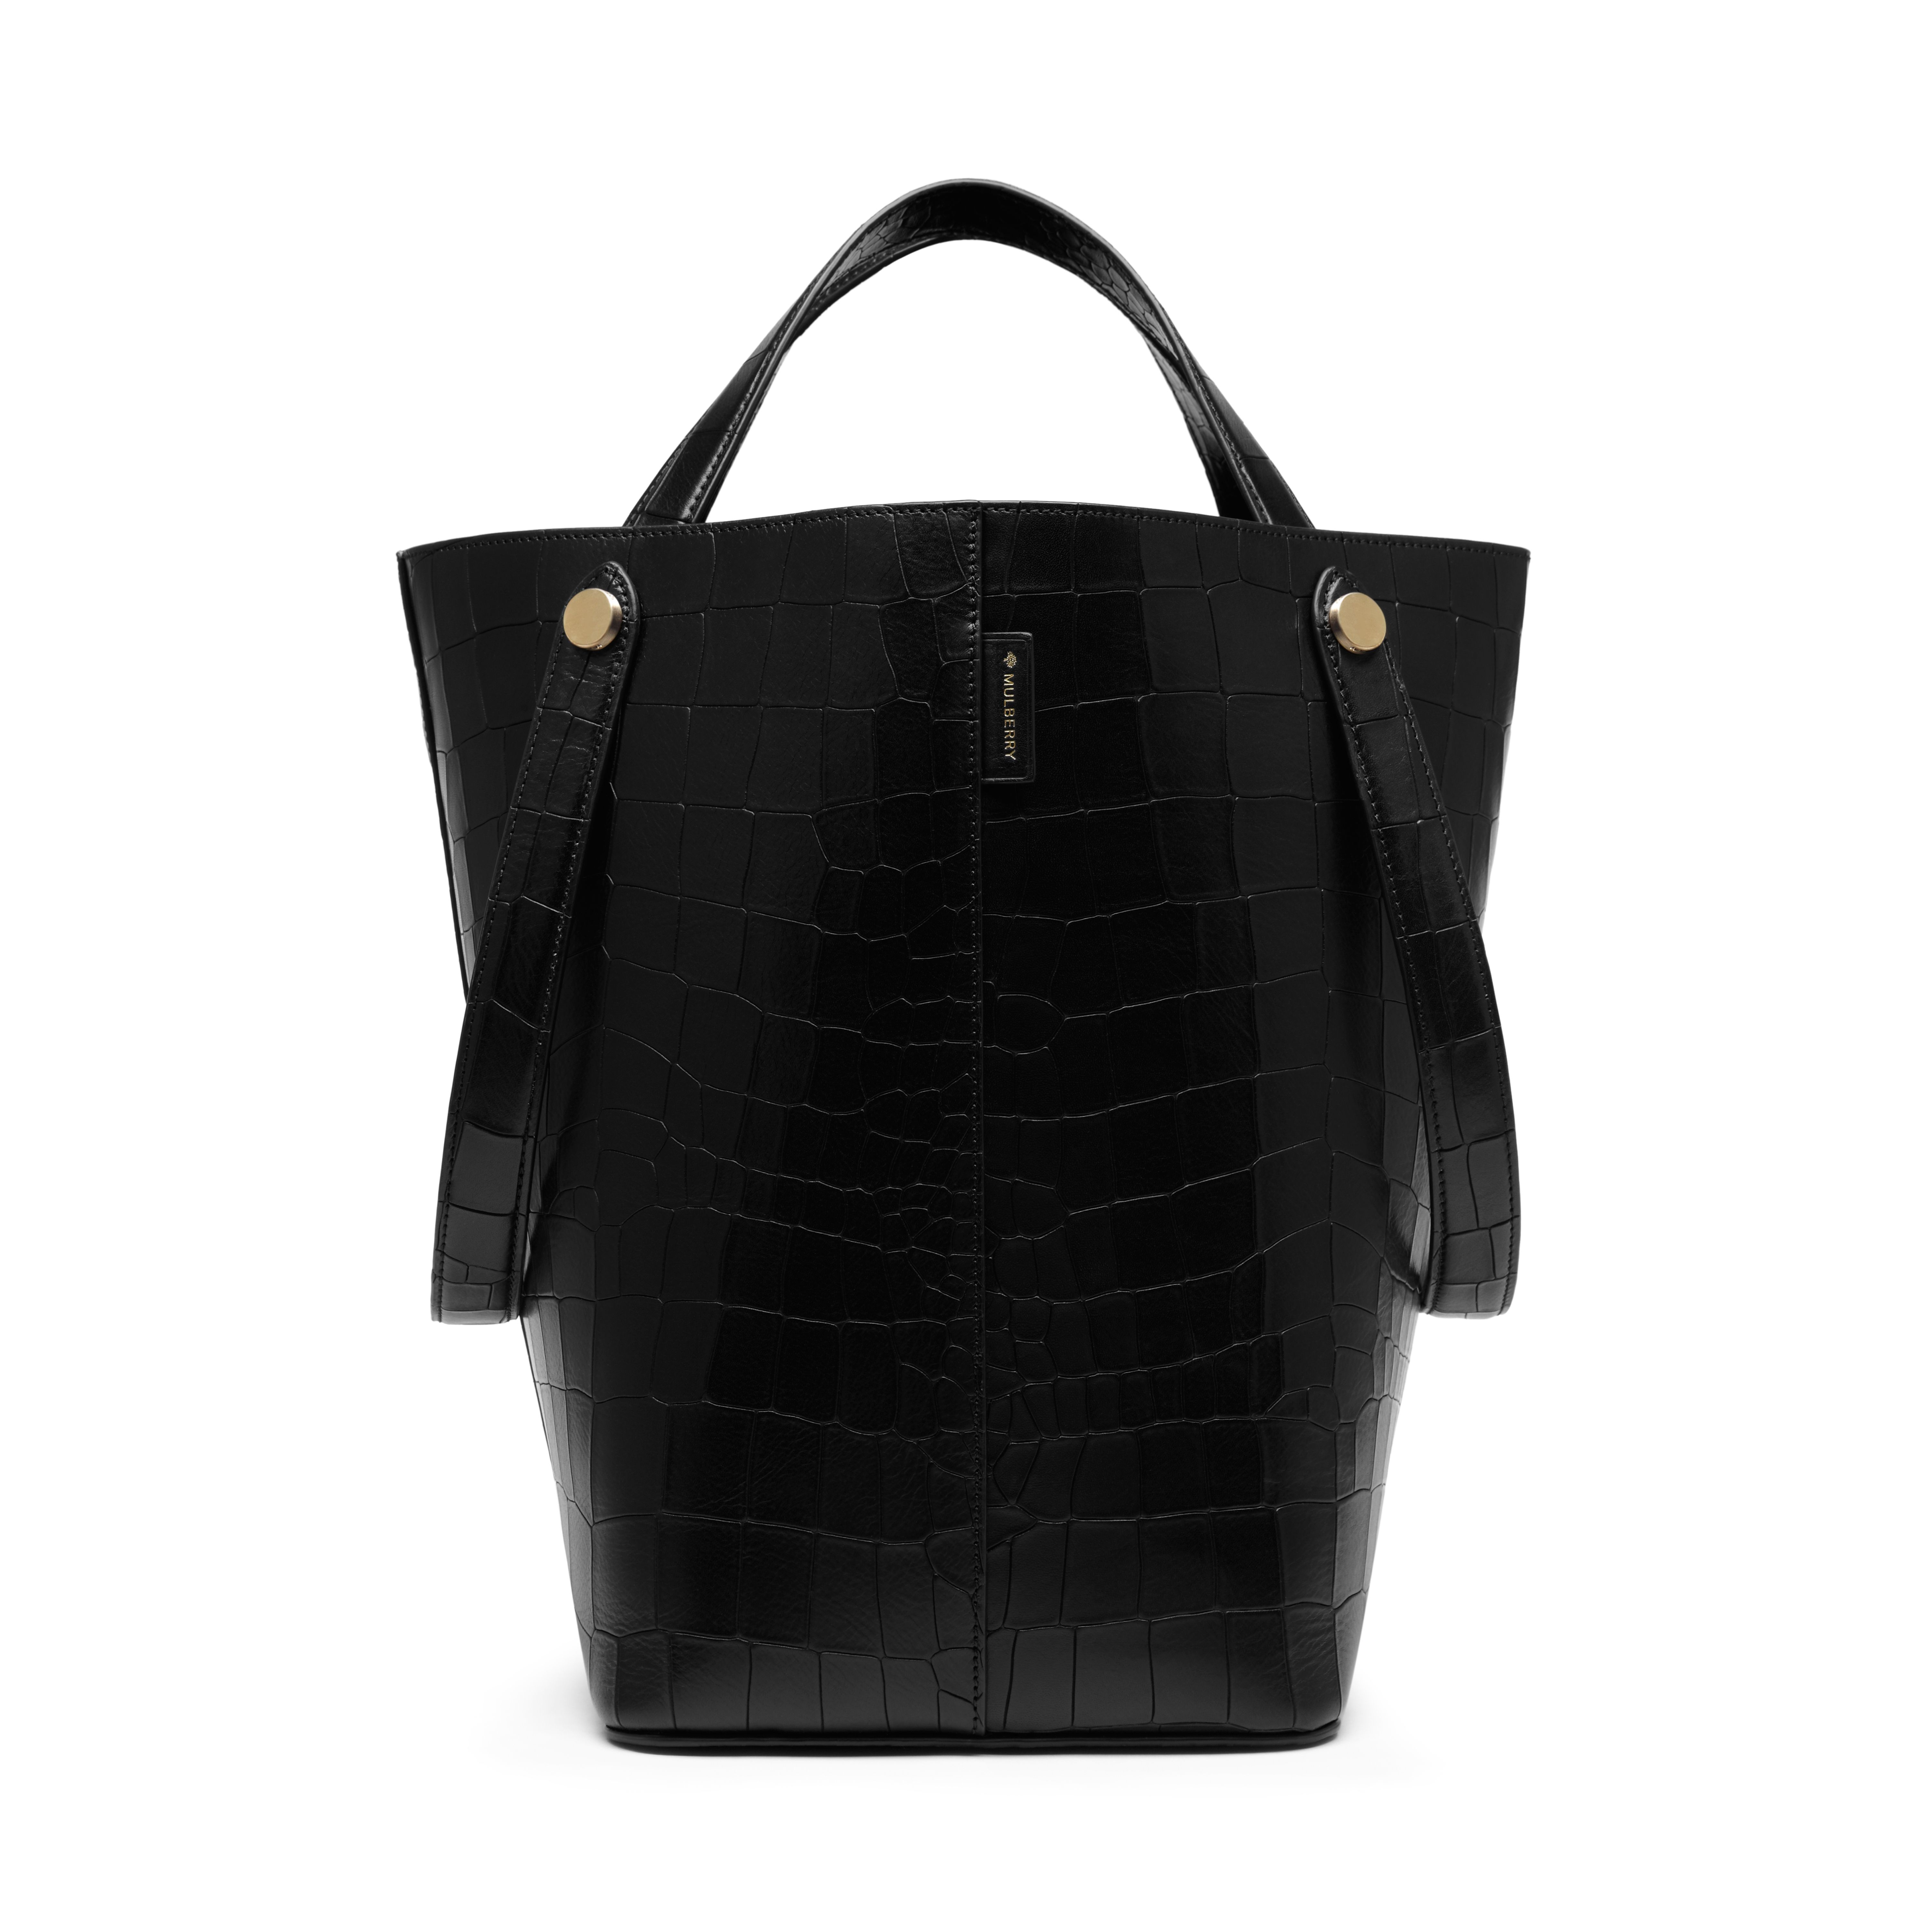 Mulberry Kite Leather Tote in Black | Lyst Australia